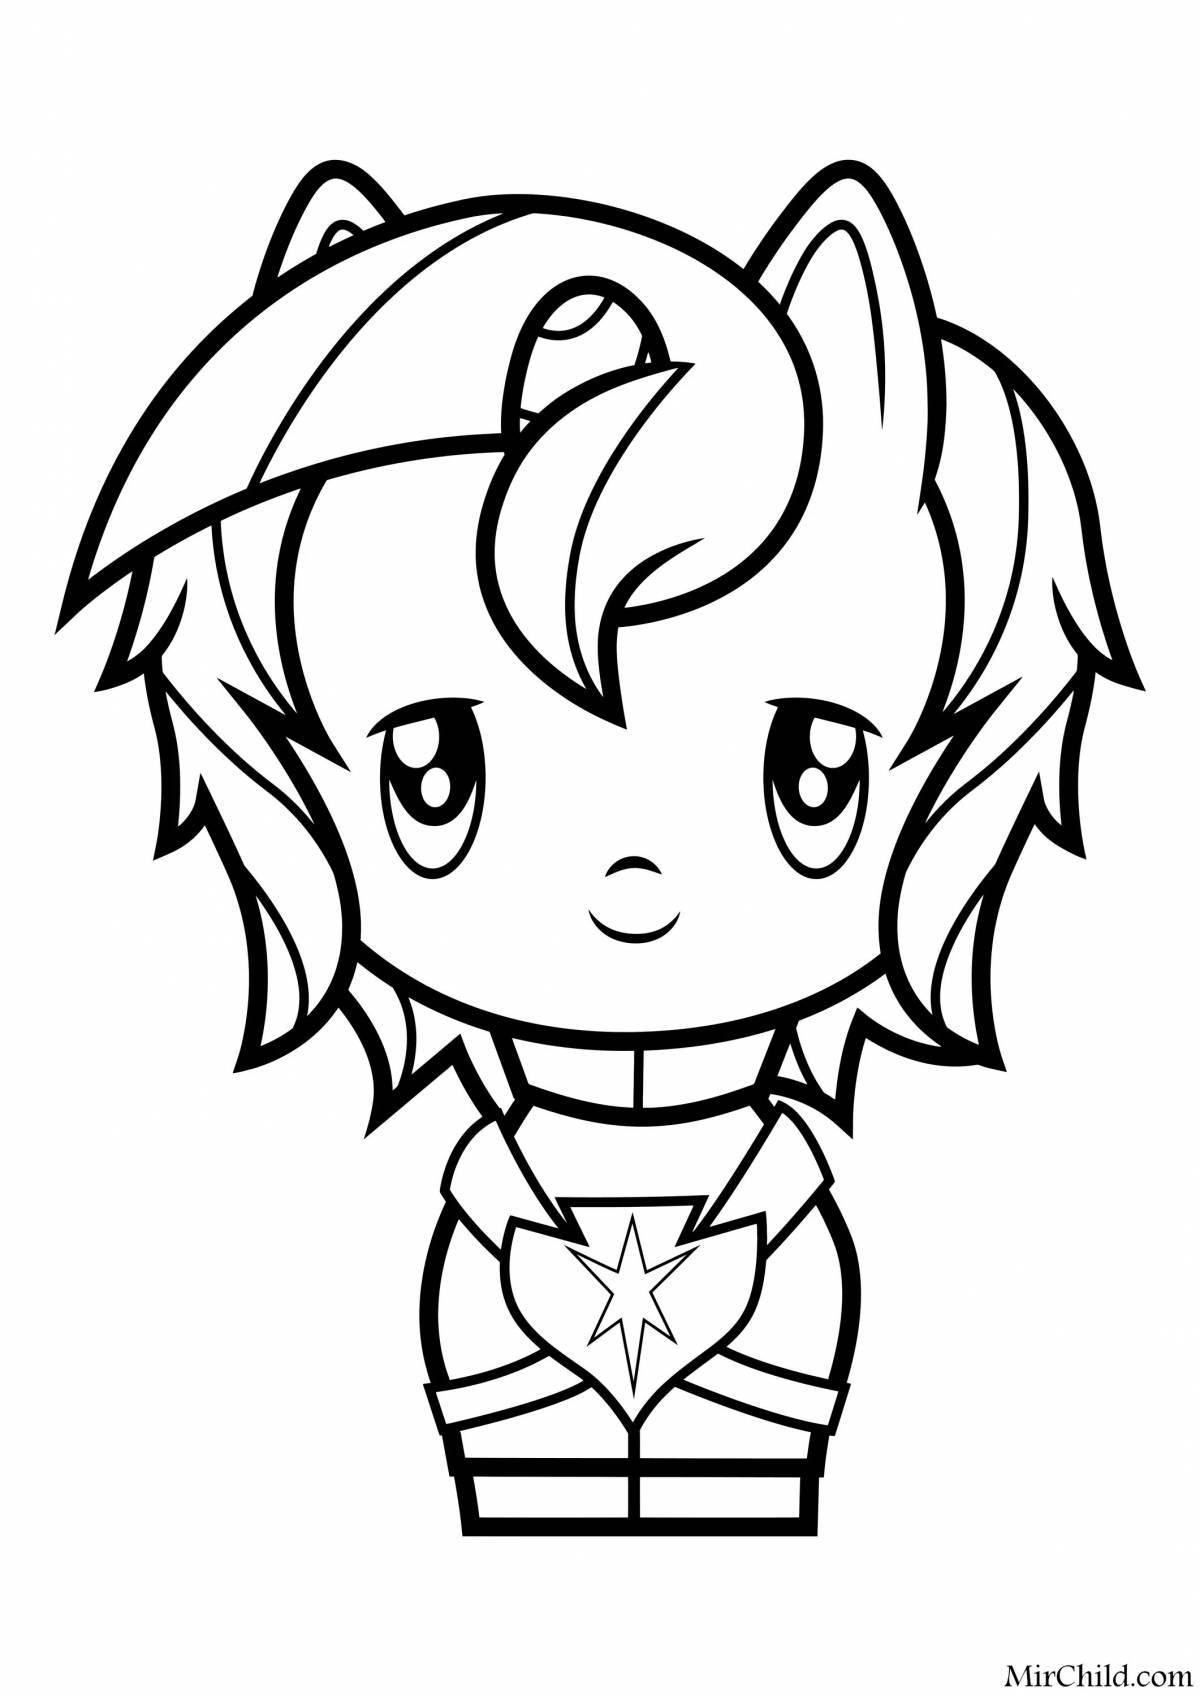 Playful pony cutie coloring page